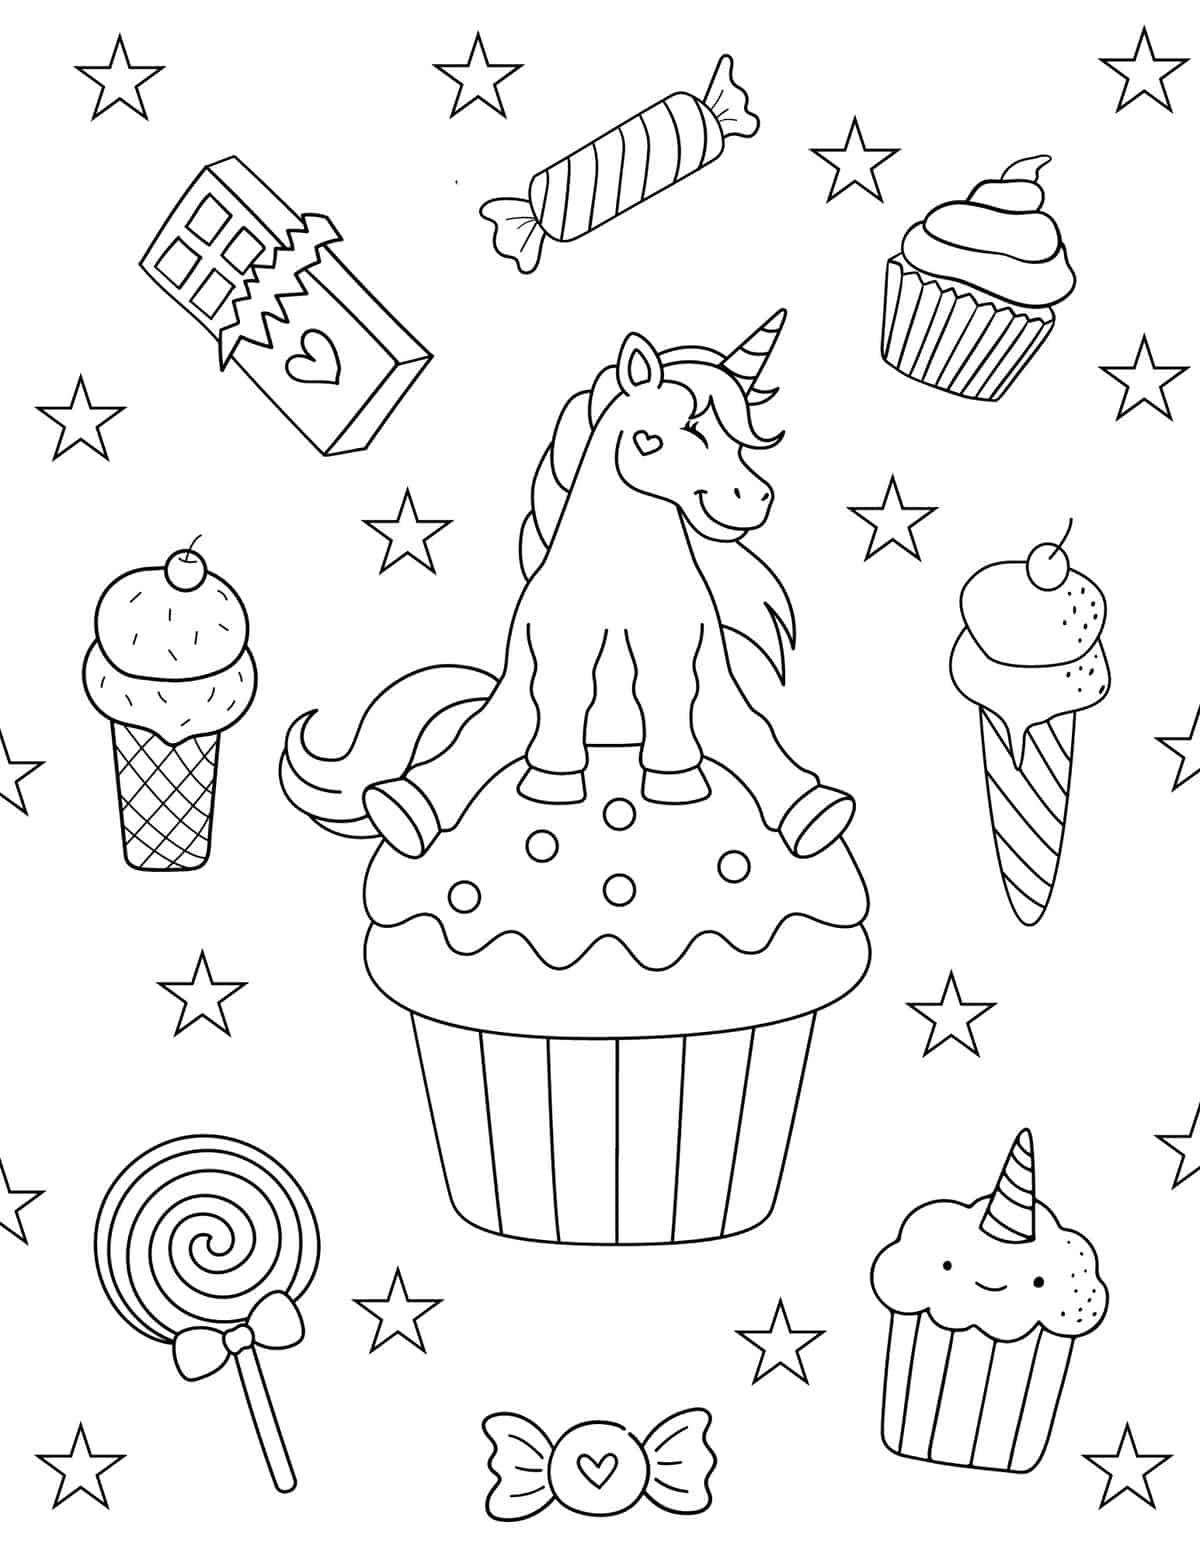 coloring sheet with a unicorn sitting on a cupcake surrounded by sweet treats